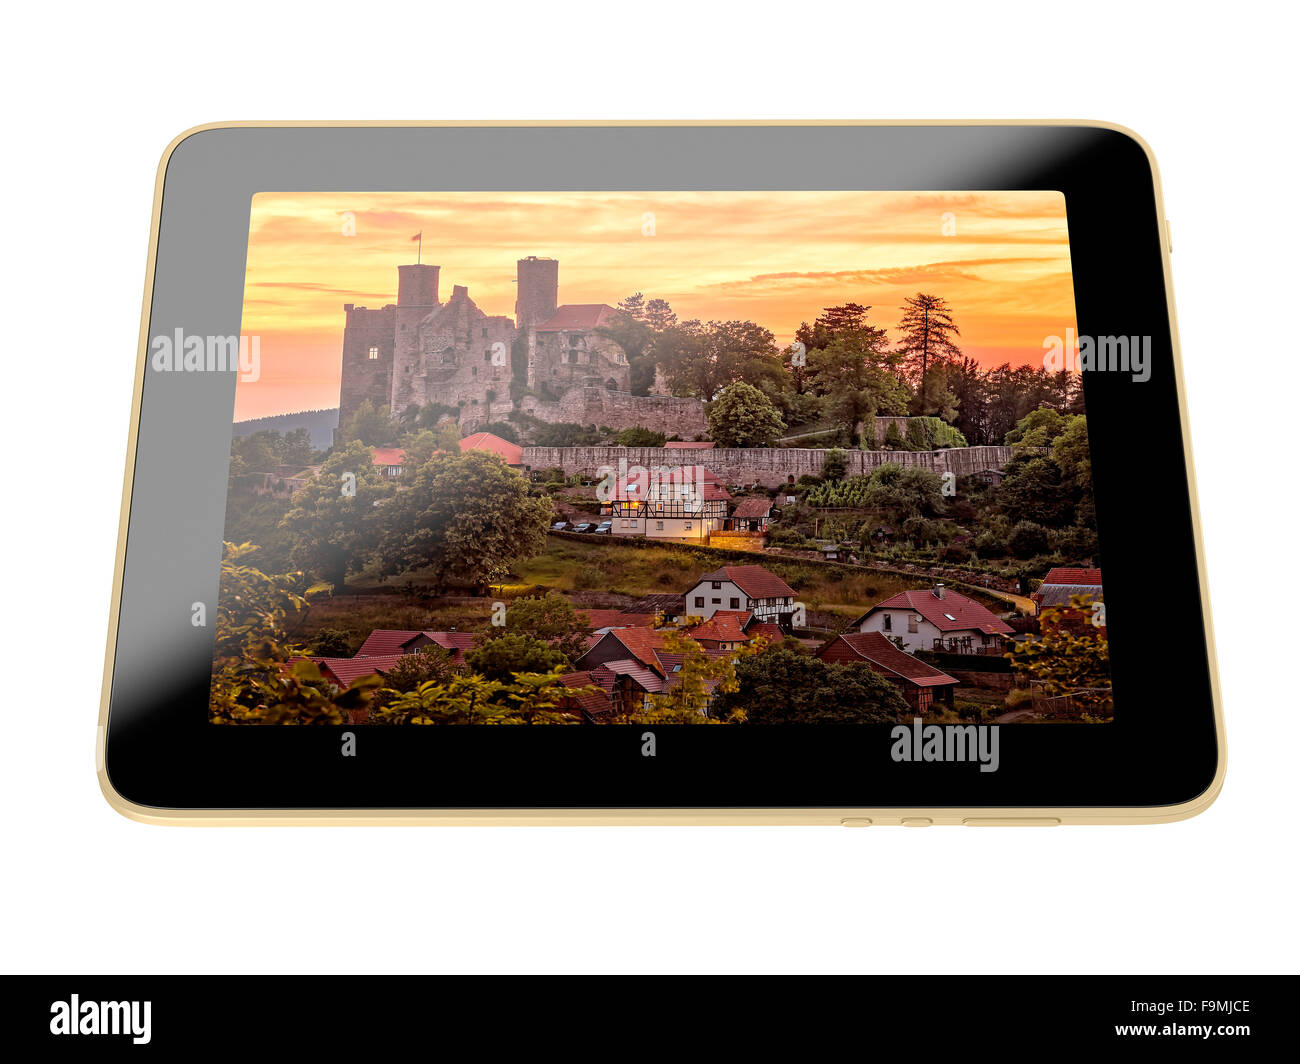 Castle ruin on tablet display Stock Photo